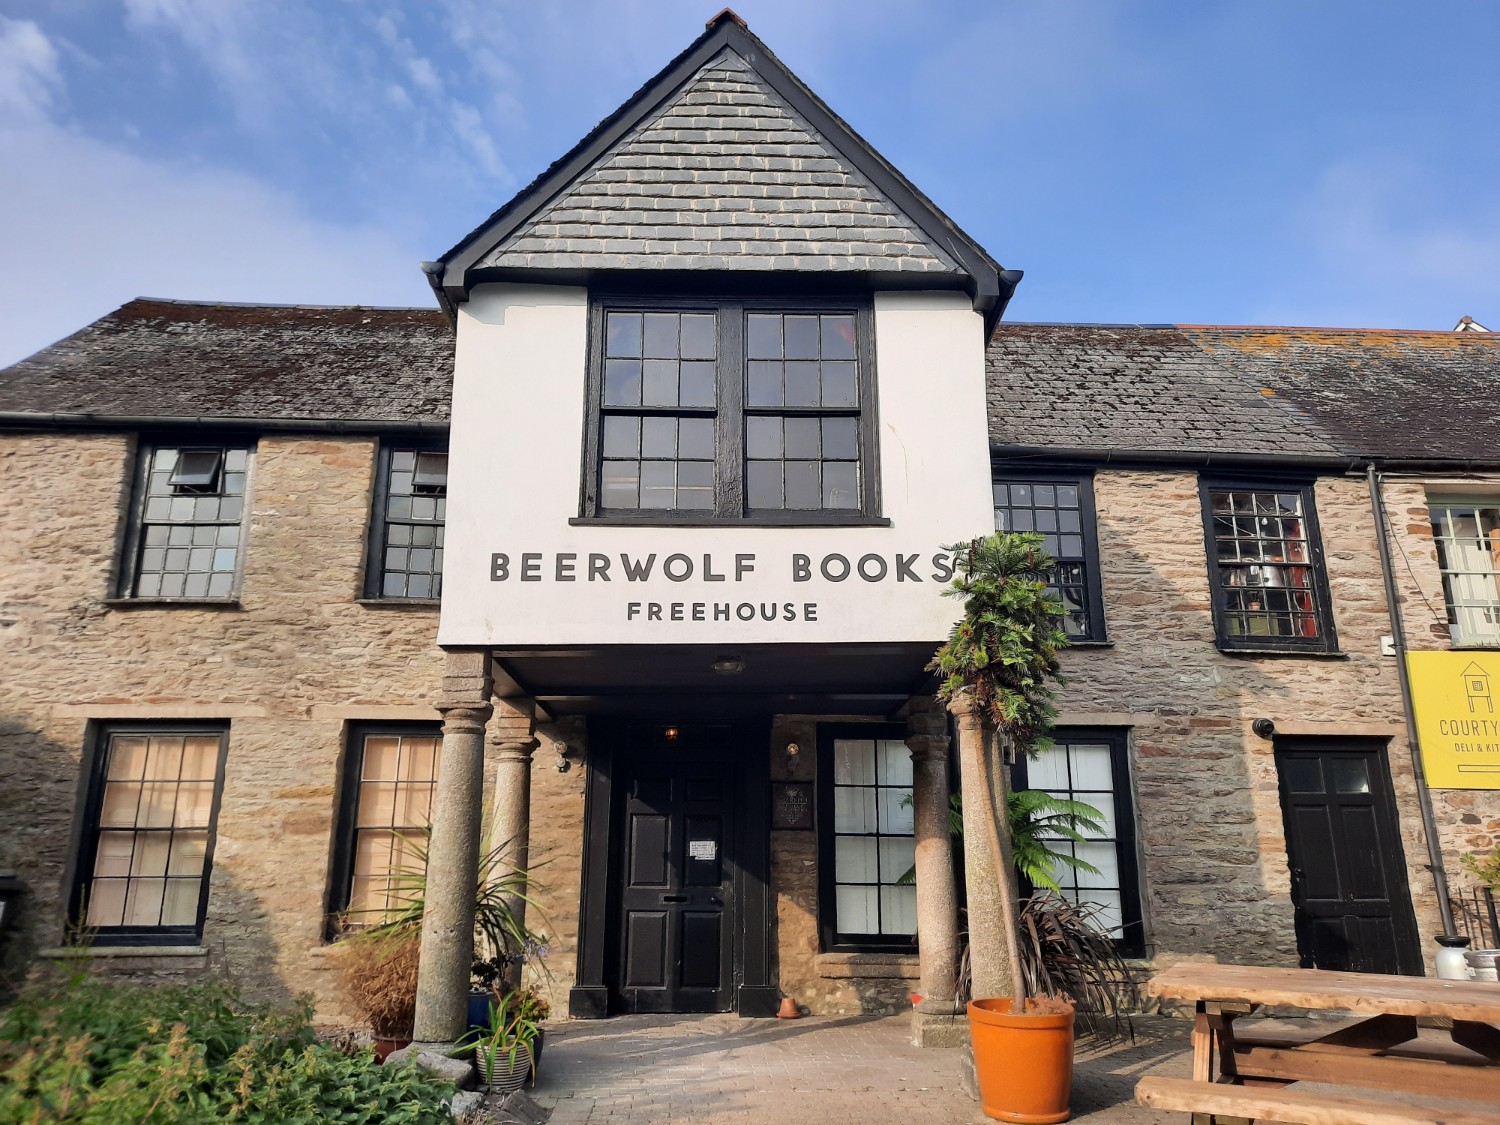 Beerwolf Books in Falmouth Cornwall